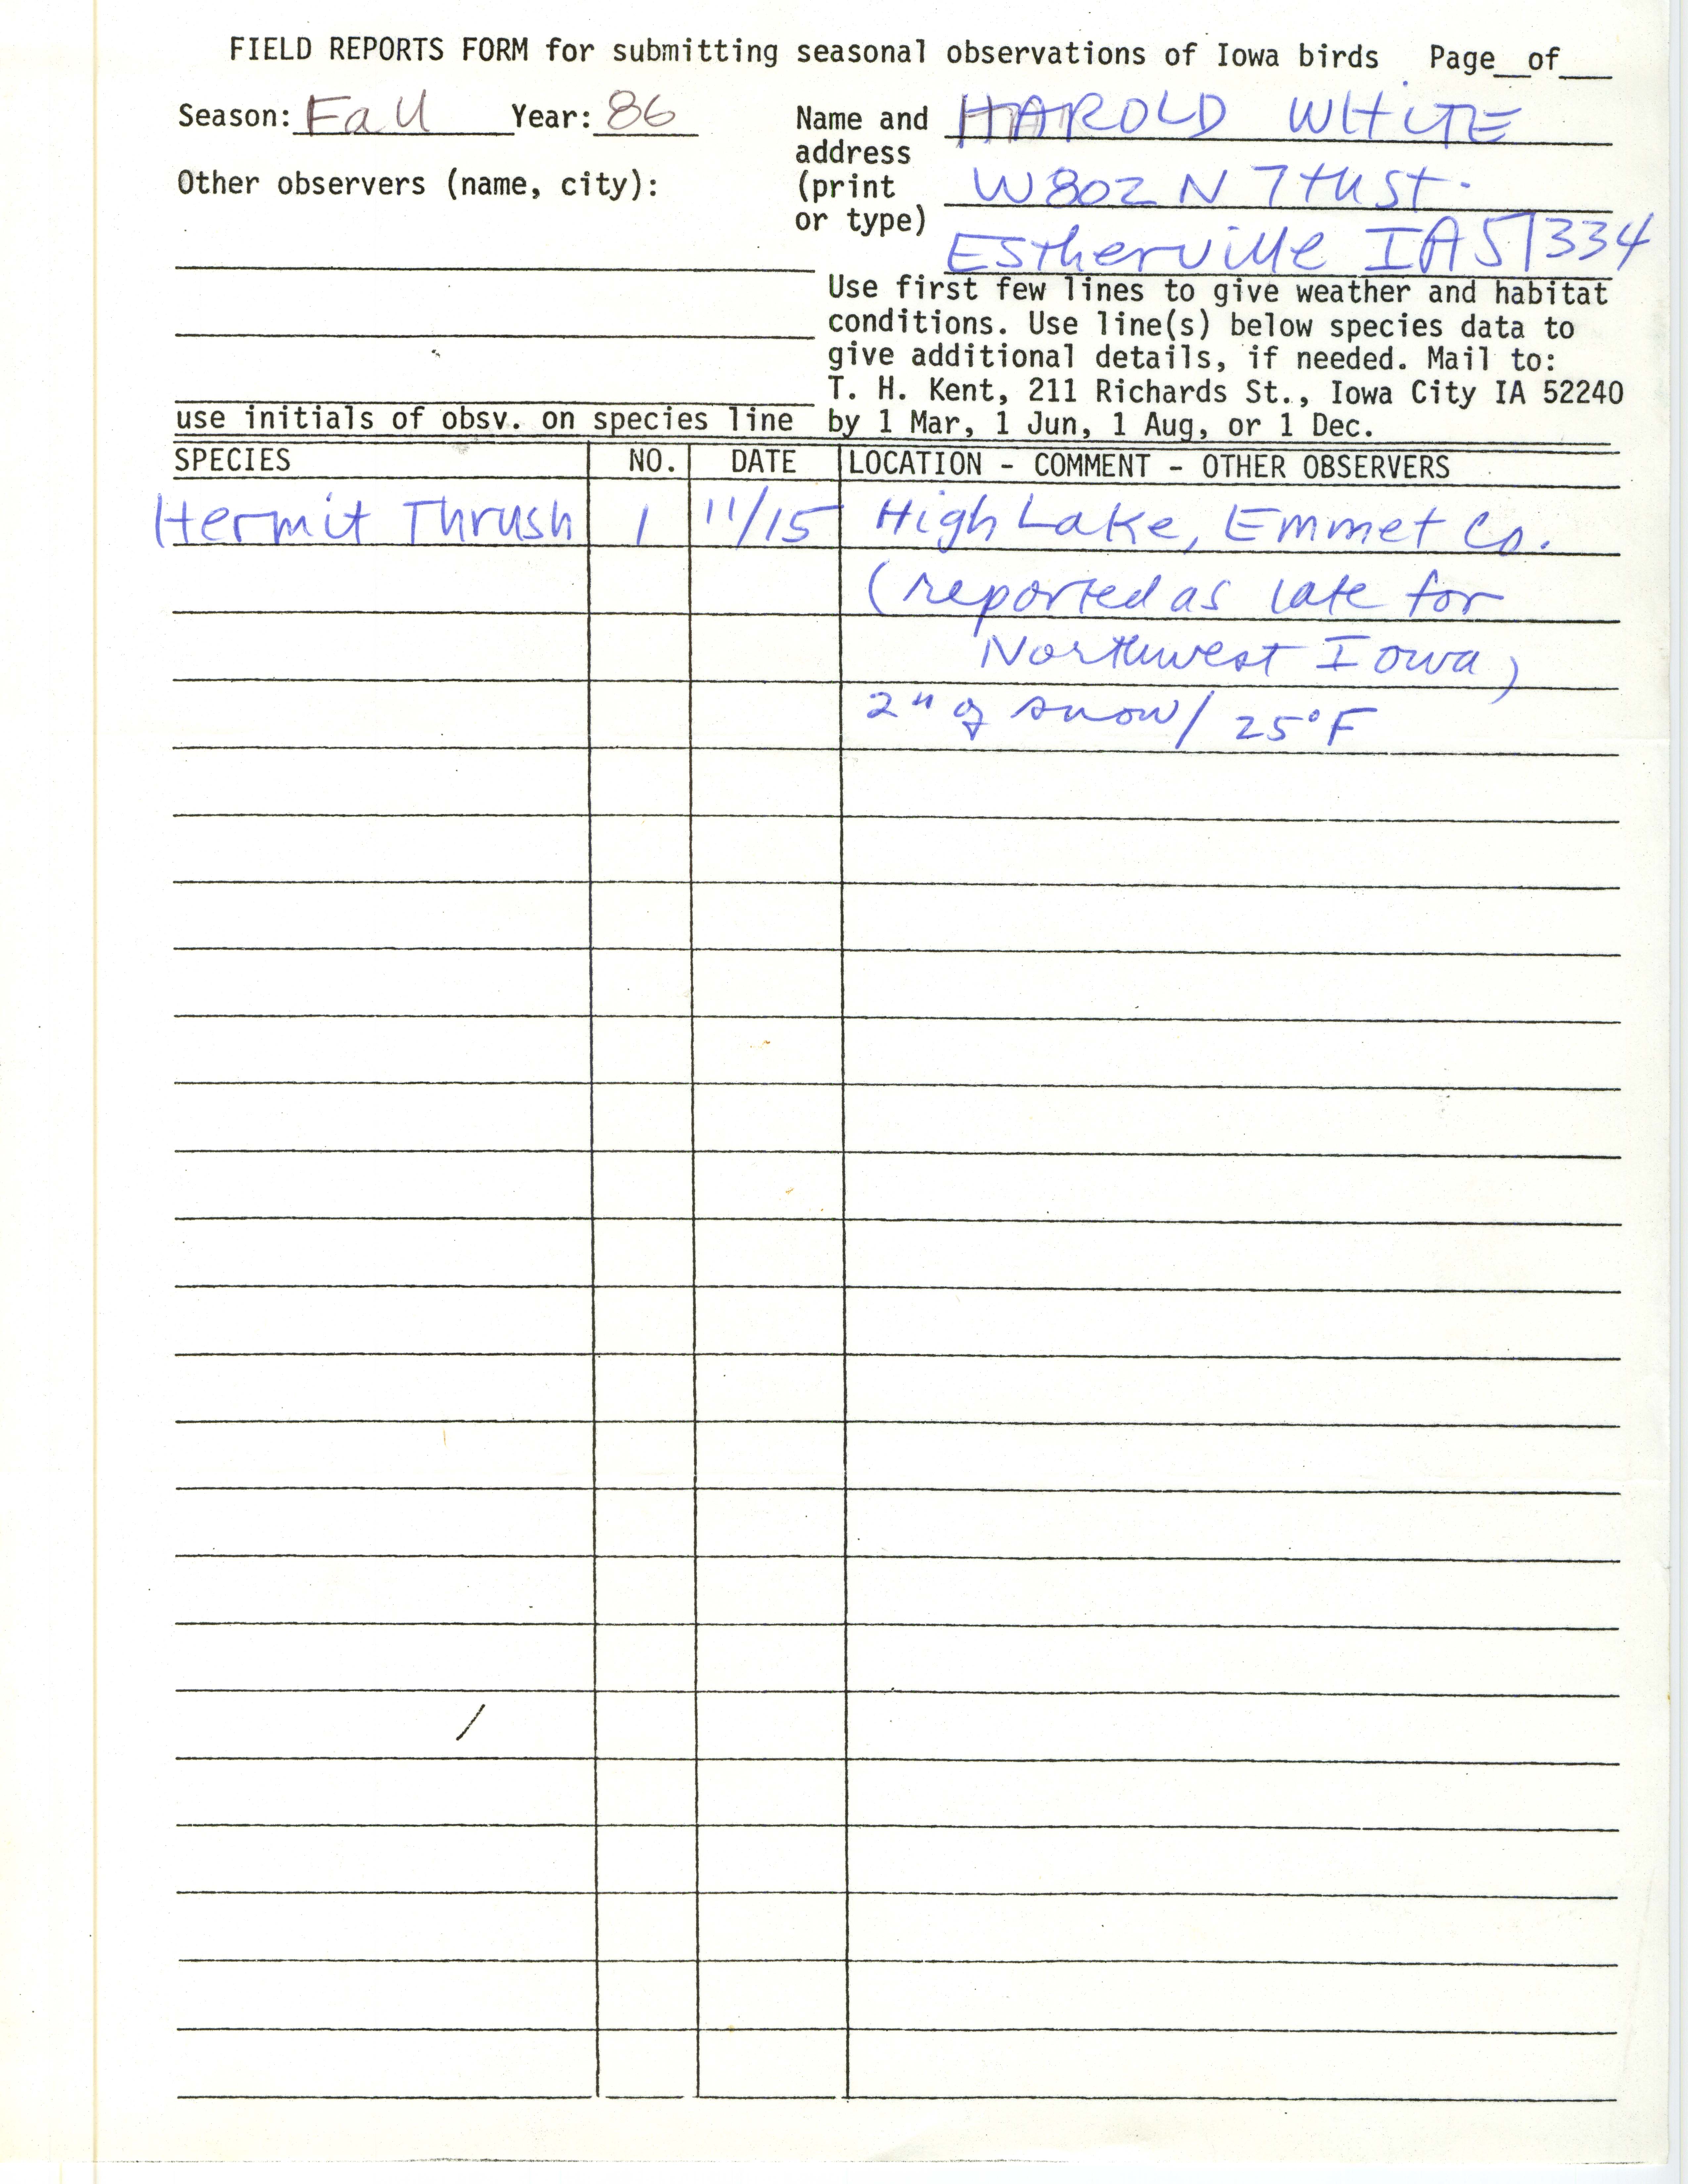 Field reports form for submitting seasonal observations of Iowa birds, Harold W. White, fall 1986